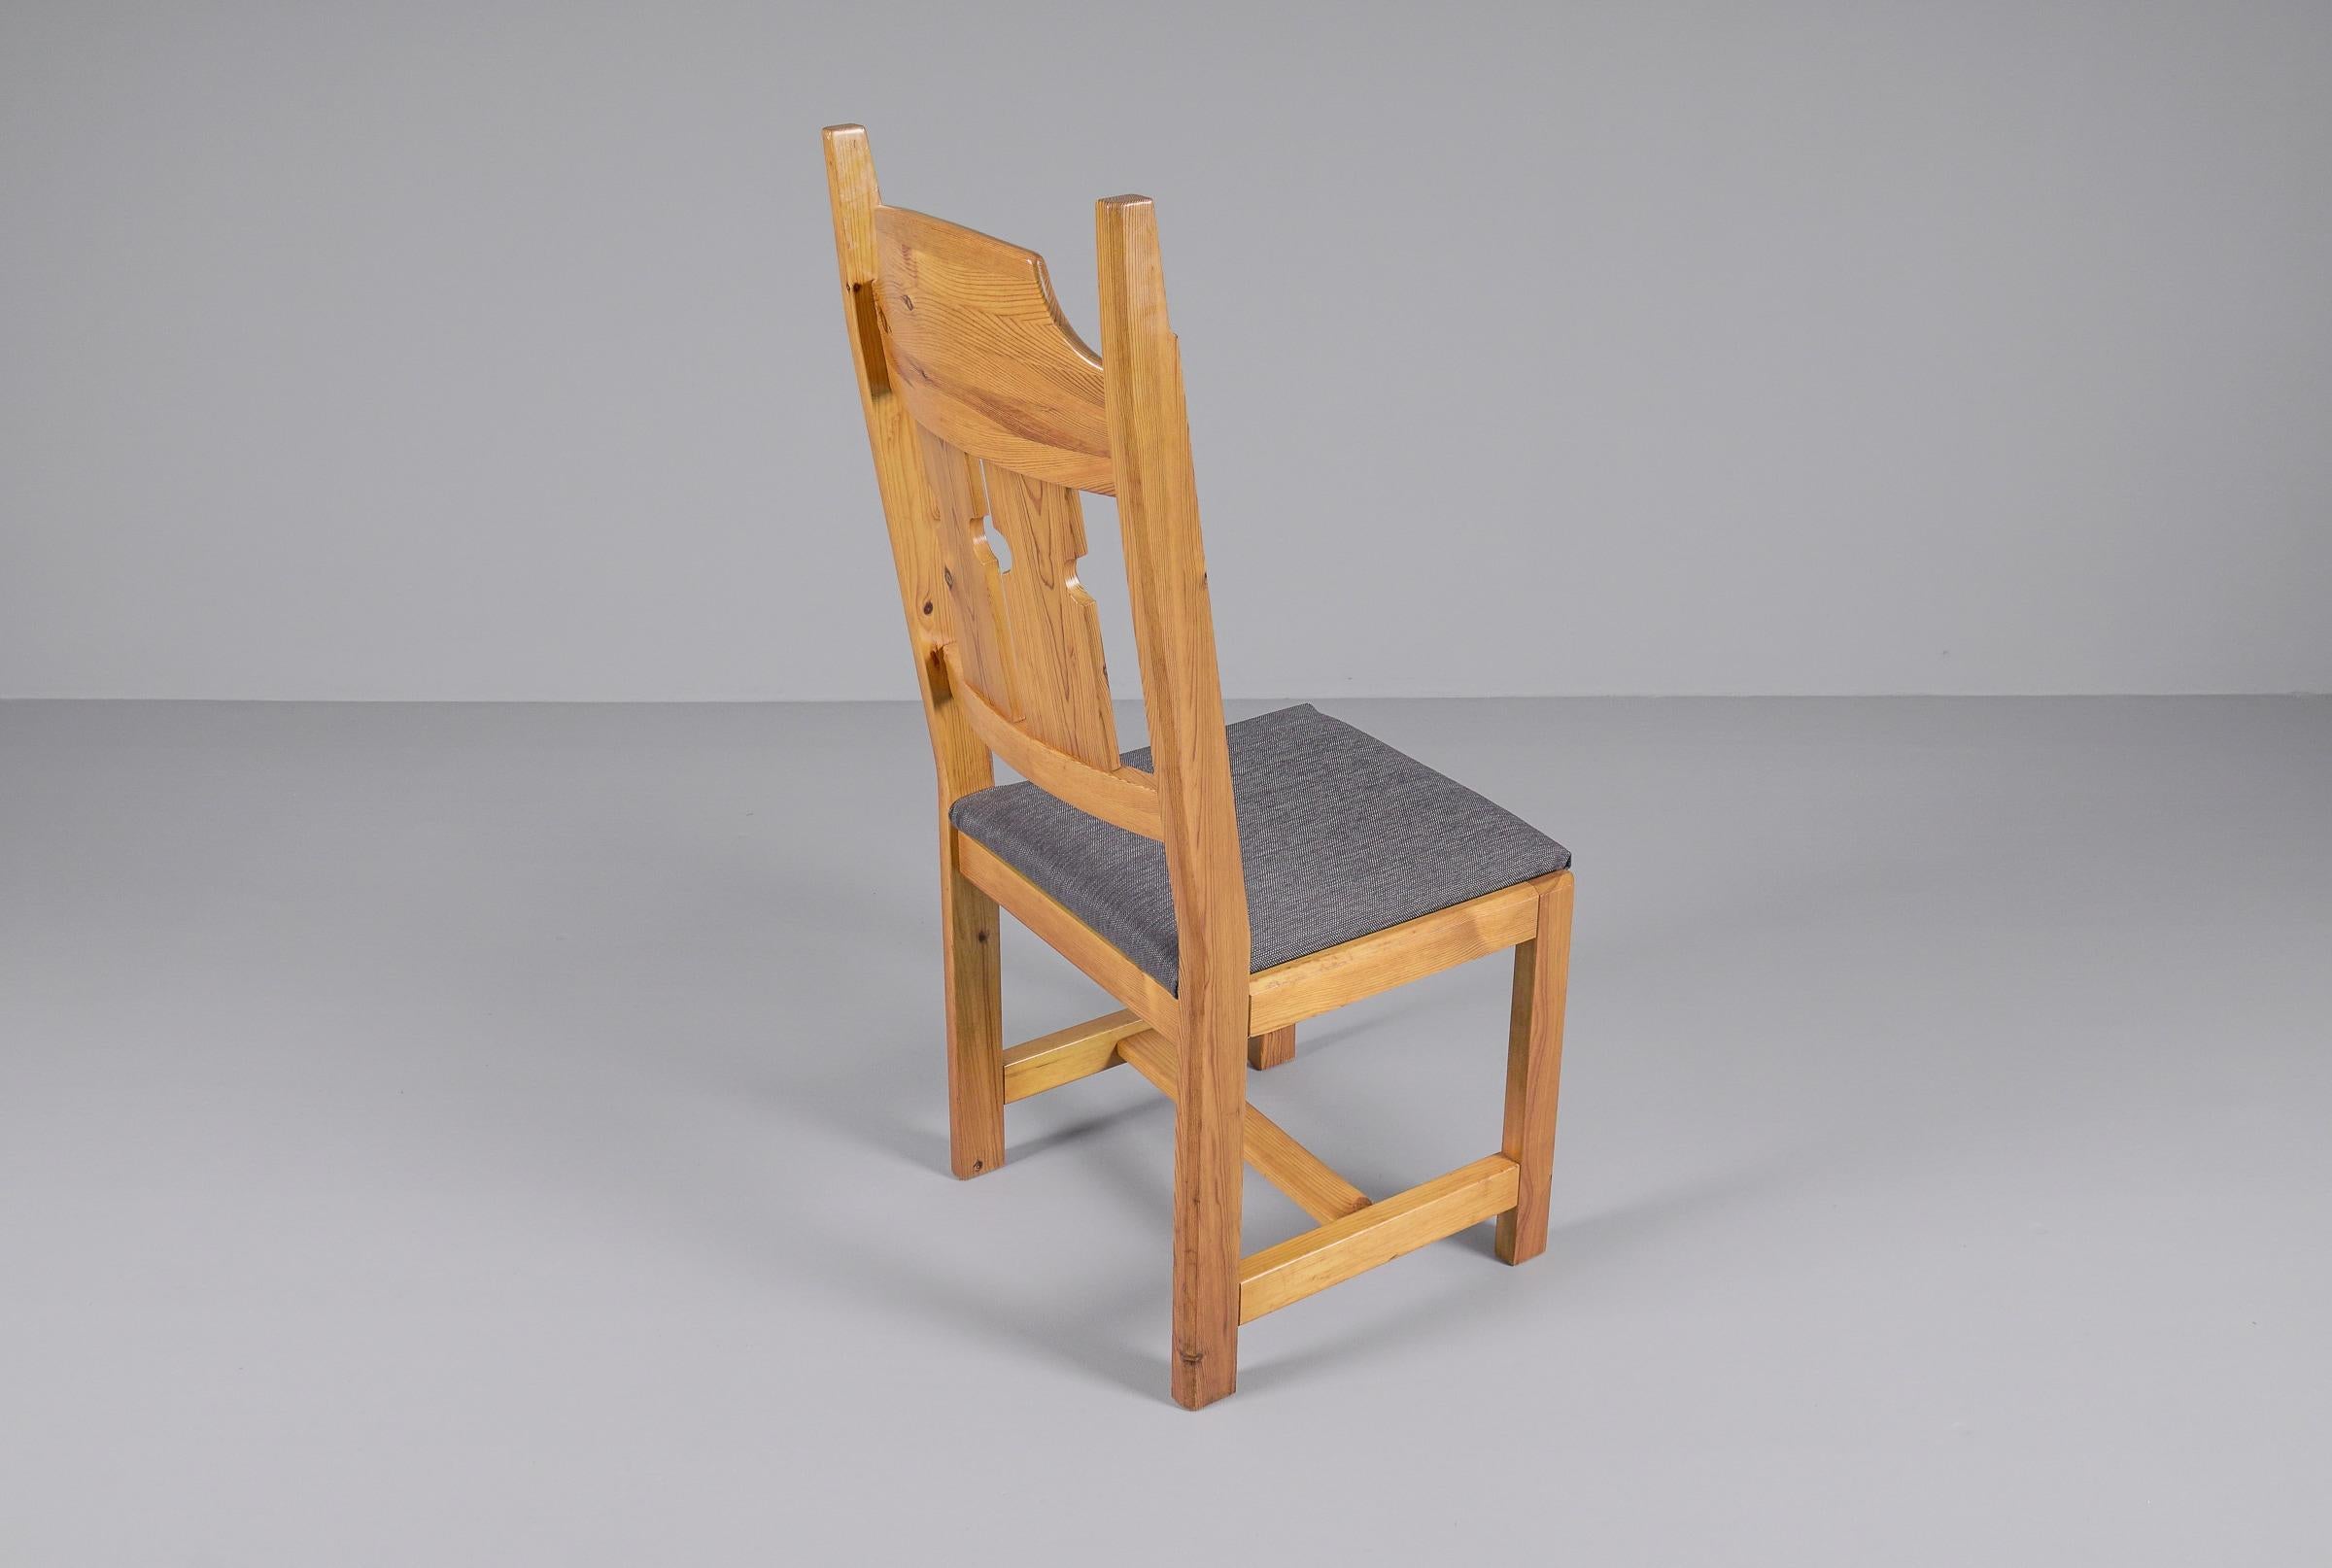  Set of 4 Swedish Pine Chairs by Gilbert Marklund for Furusnickarn AB, 1970s For Sale 9